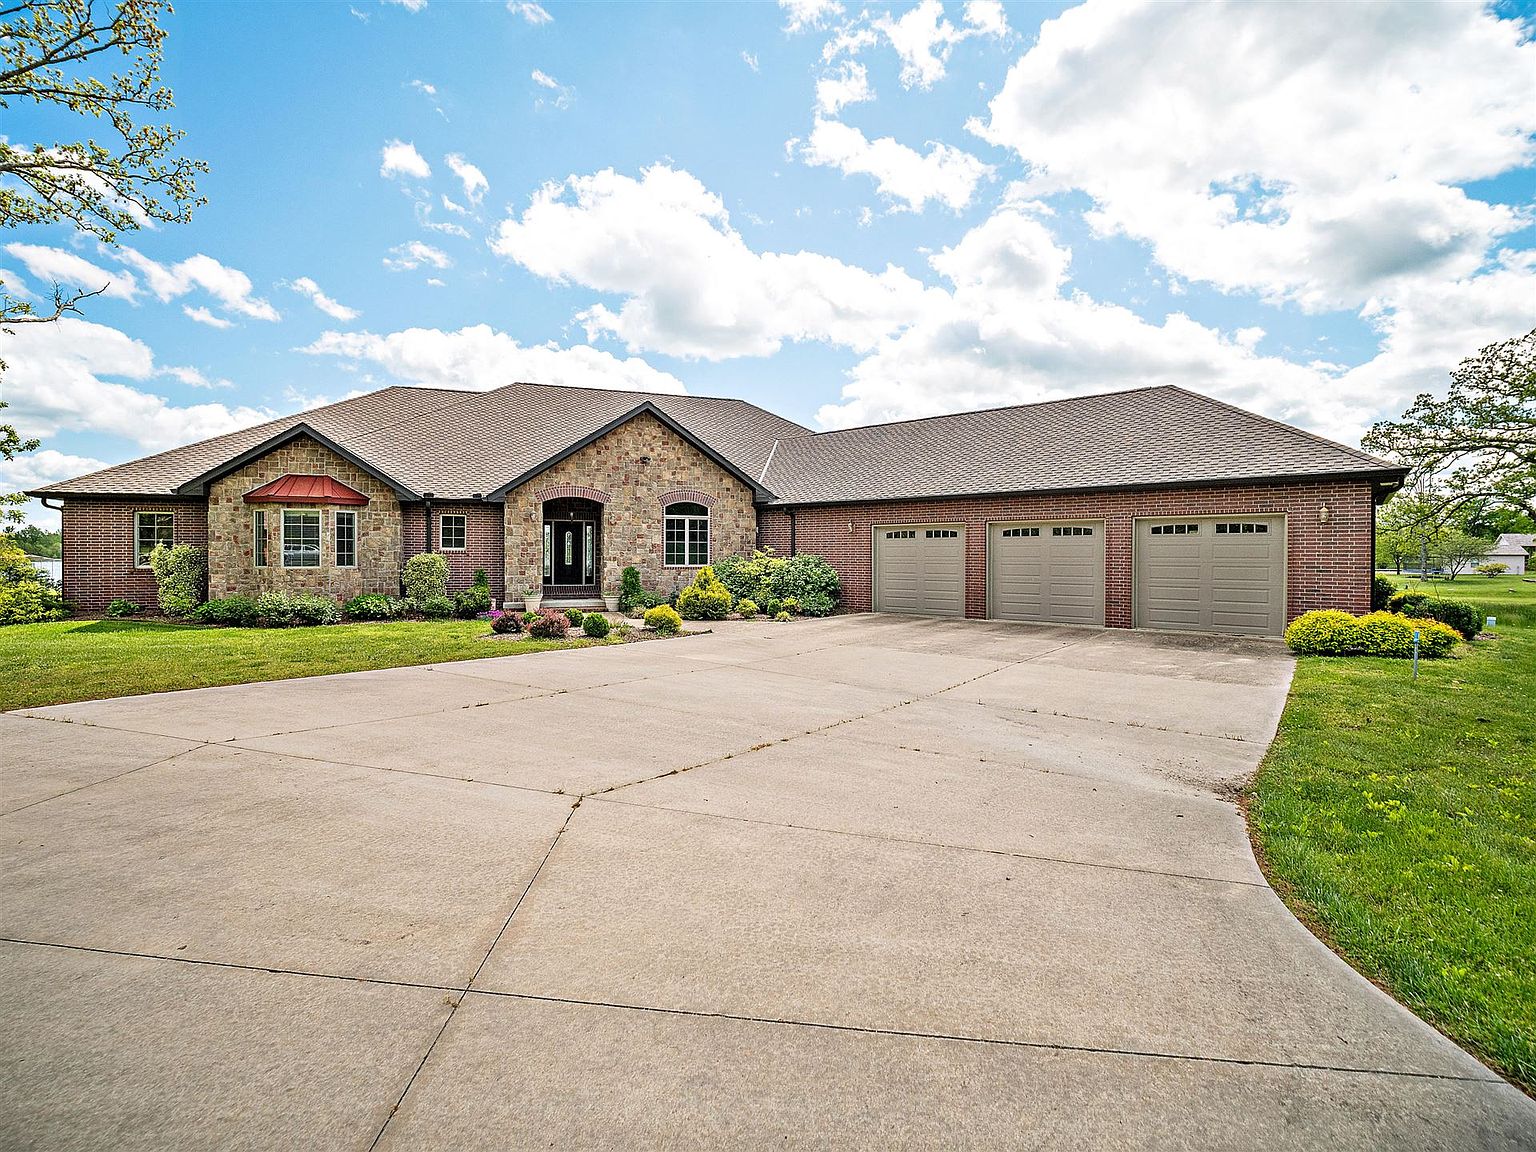 4932 county road 8940 west plains mo 65775 zillow 4932 county road 8940 west plains mo